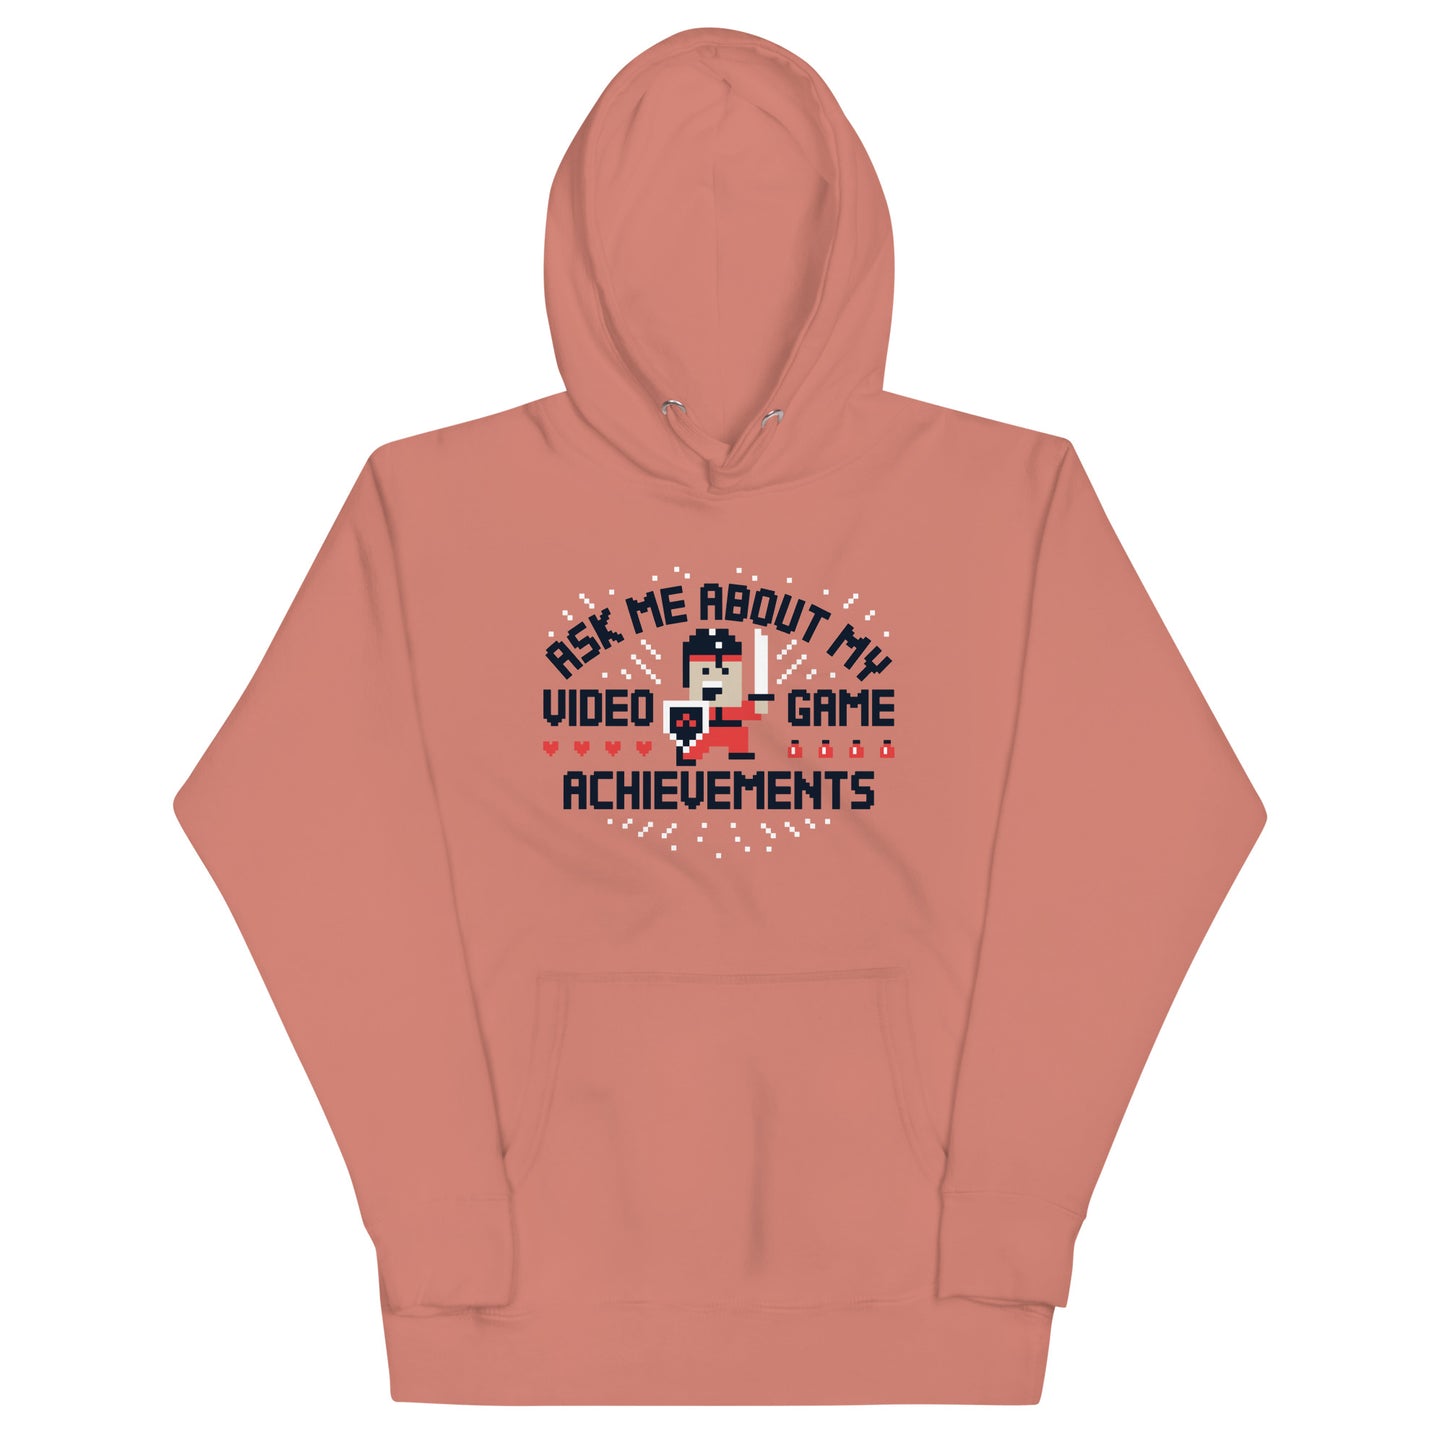 Ask Me About My Video Game Achievements Unisex Hoodie